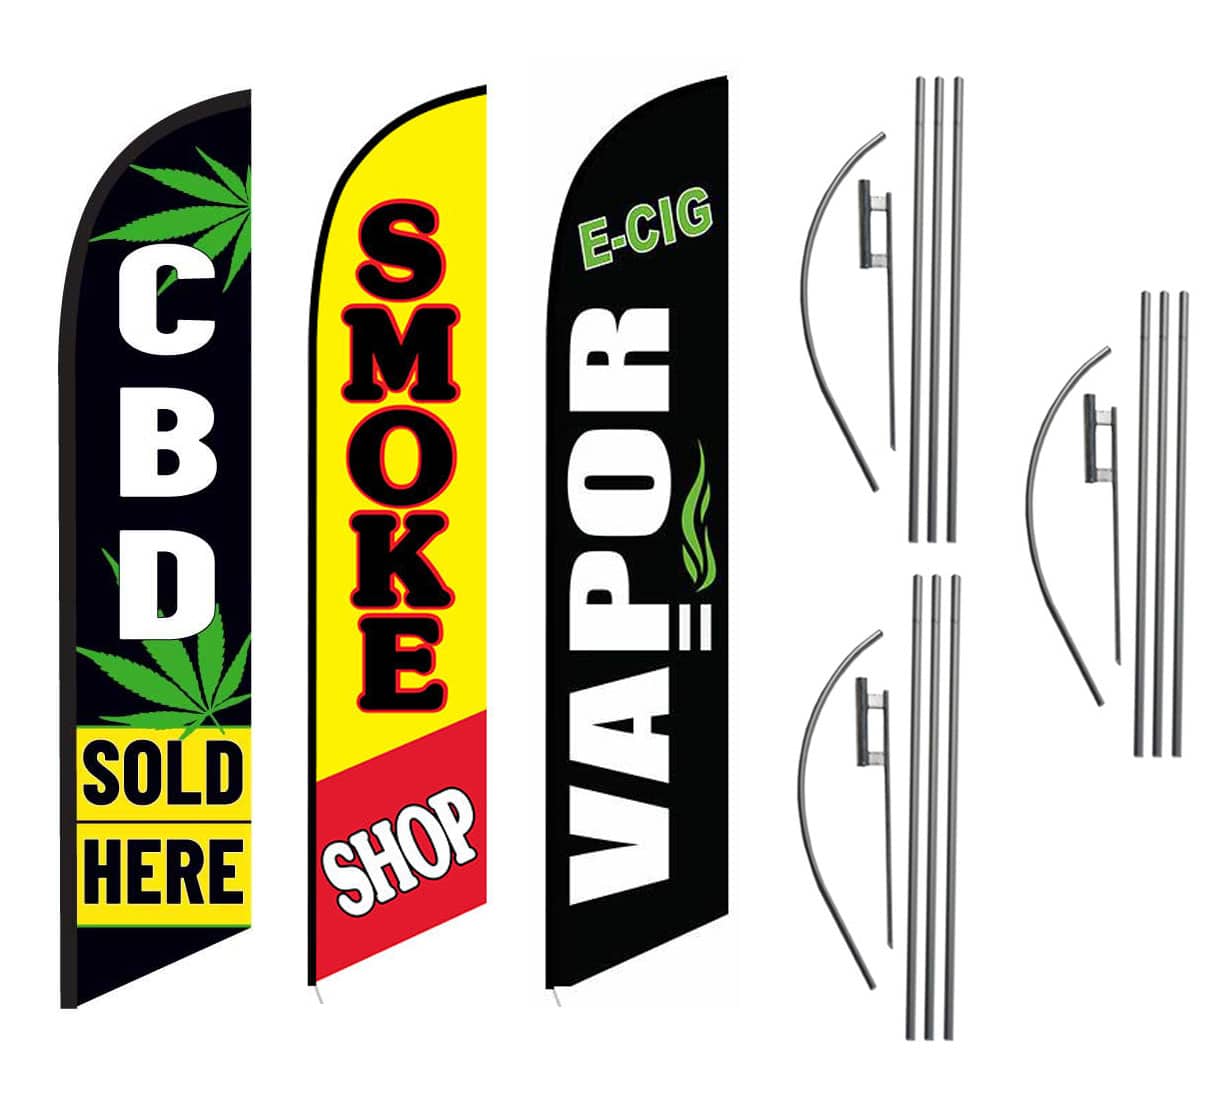 E-CIGS VAPOR SOLD HERE kf Swooper Flag Feather Banner Sign 11.5' 